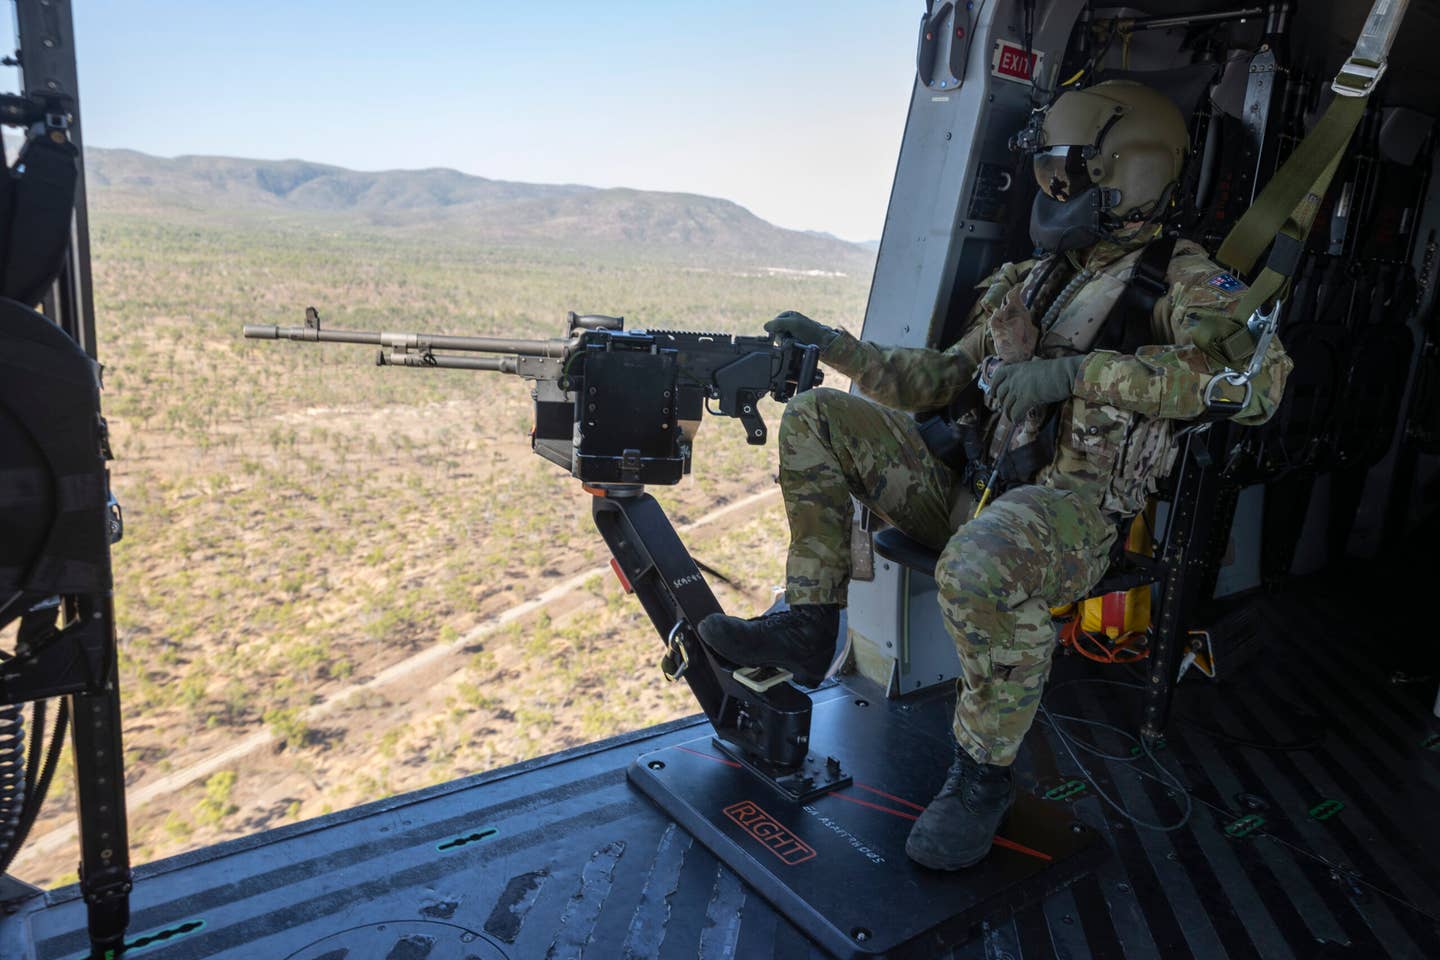 An Australian Army soldier from the 5th Aviation Regiment mans the door gun on an MRH90 during Exercise Vigilant Scimitar, Townsville Field Training Area, November 2020. <em>COMMONWEALTH OF AUSTRALIA, DEPARTMENT OF DEFENSE</em>